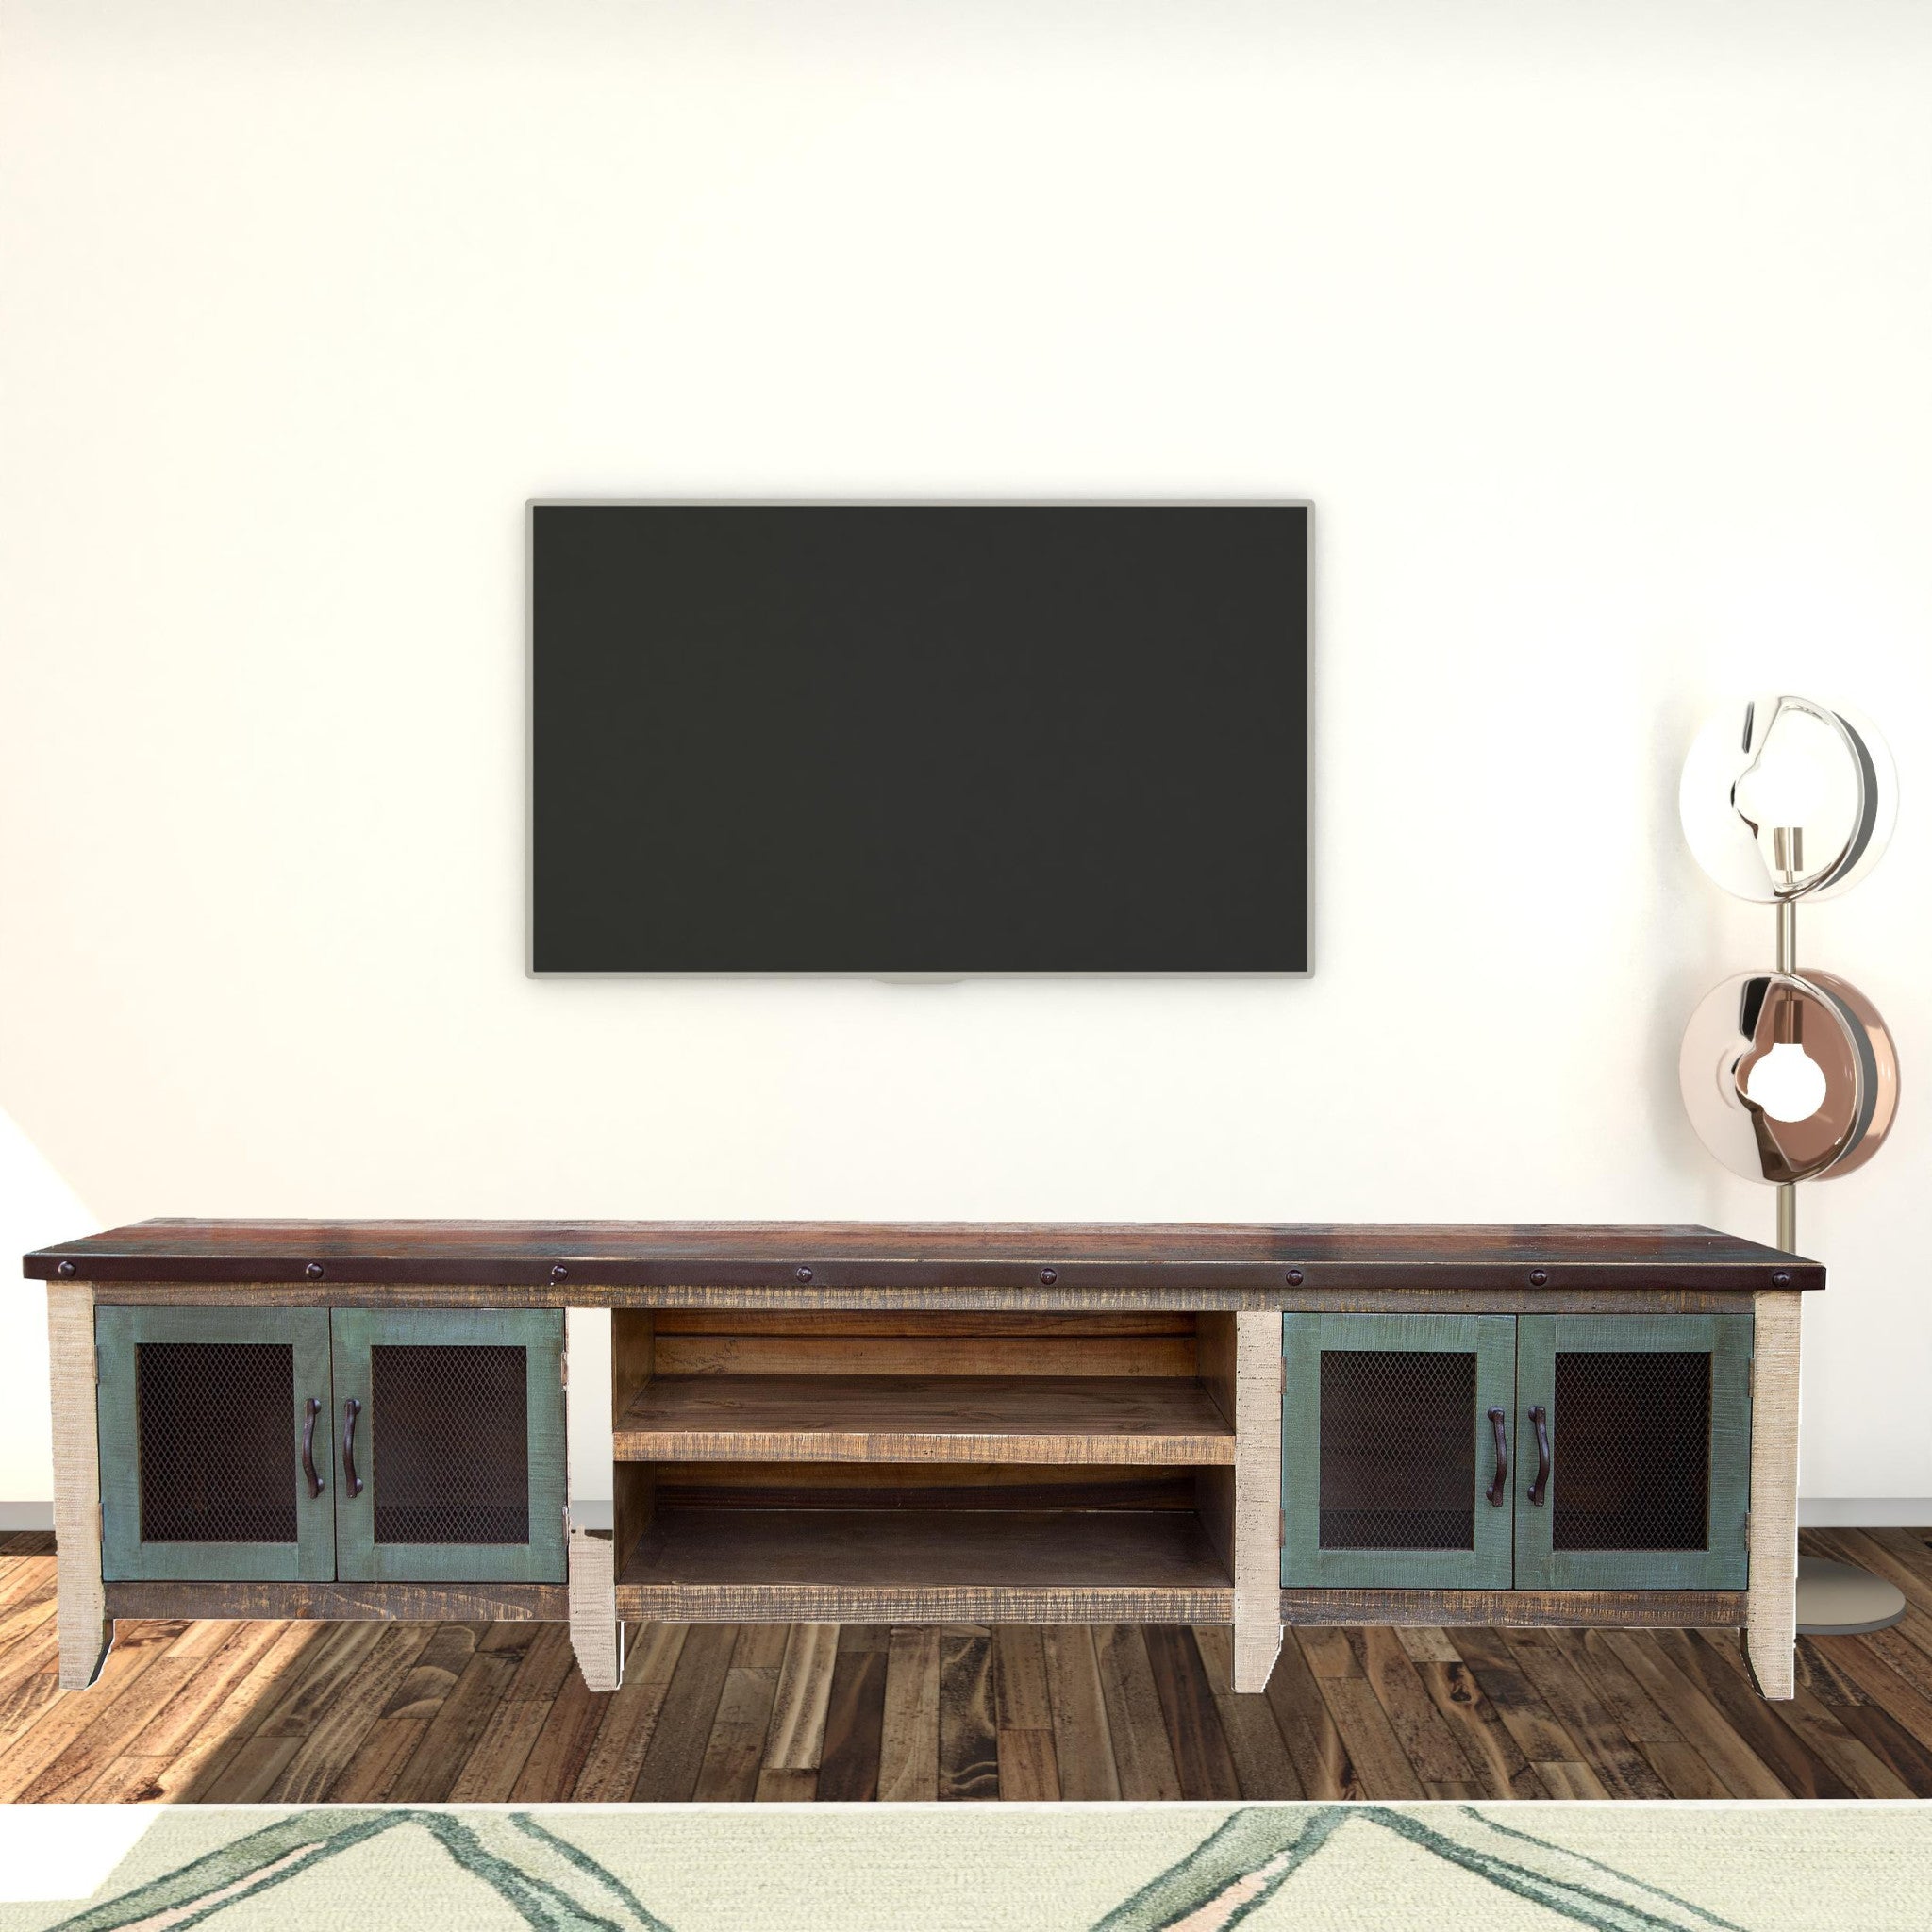 93" Brown Solid Wood Cabinet Enclosed Storage Distressed TV Stand